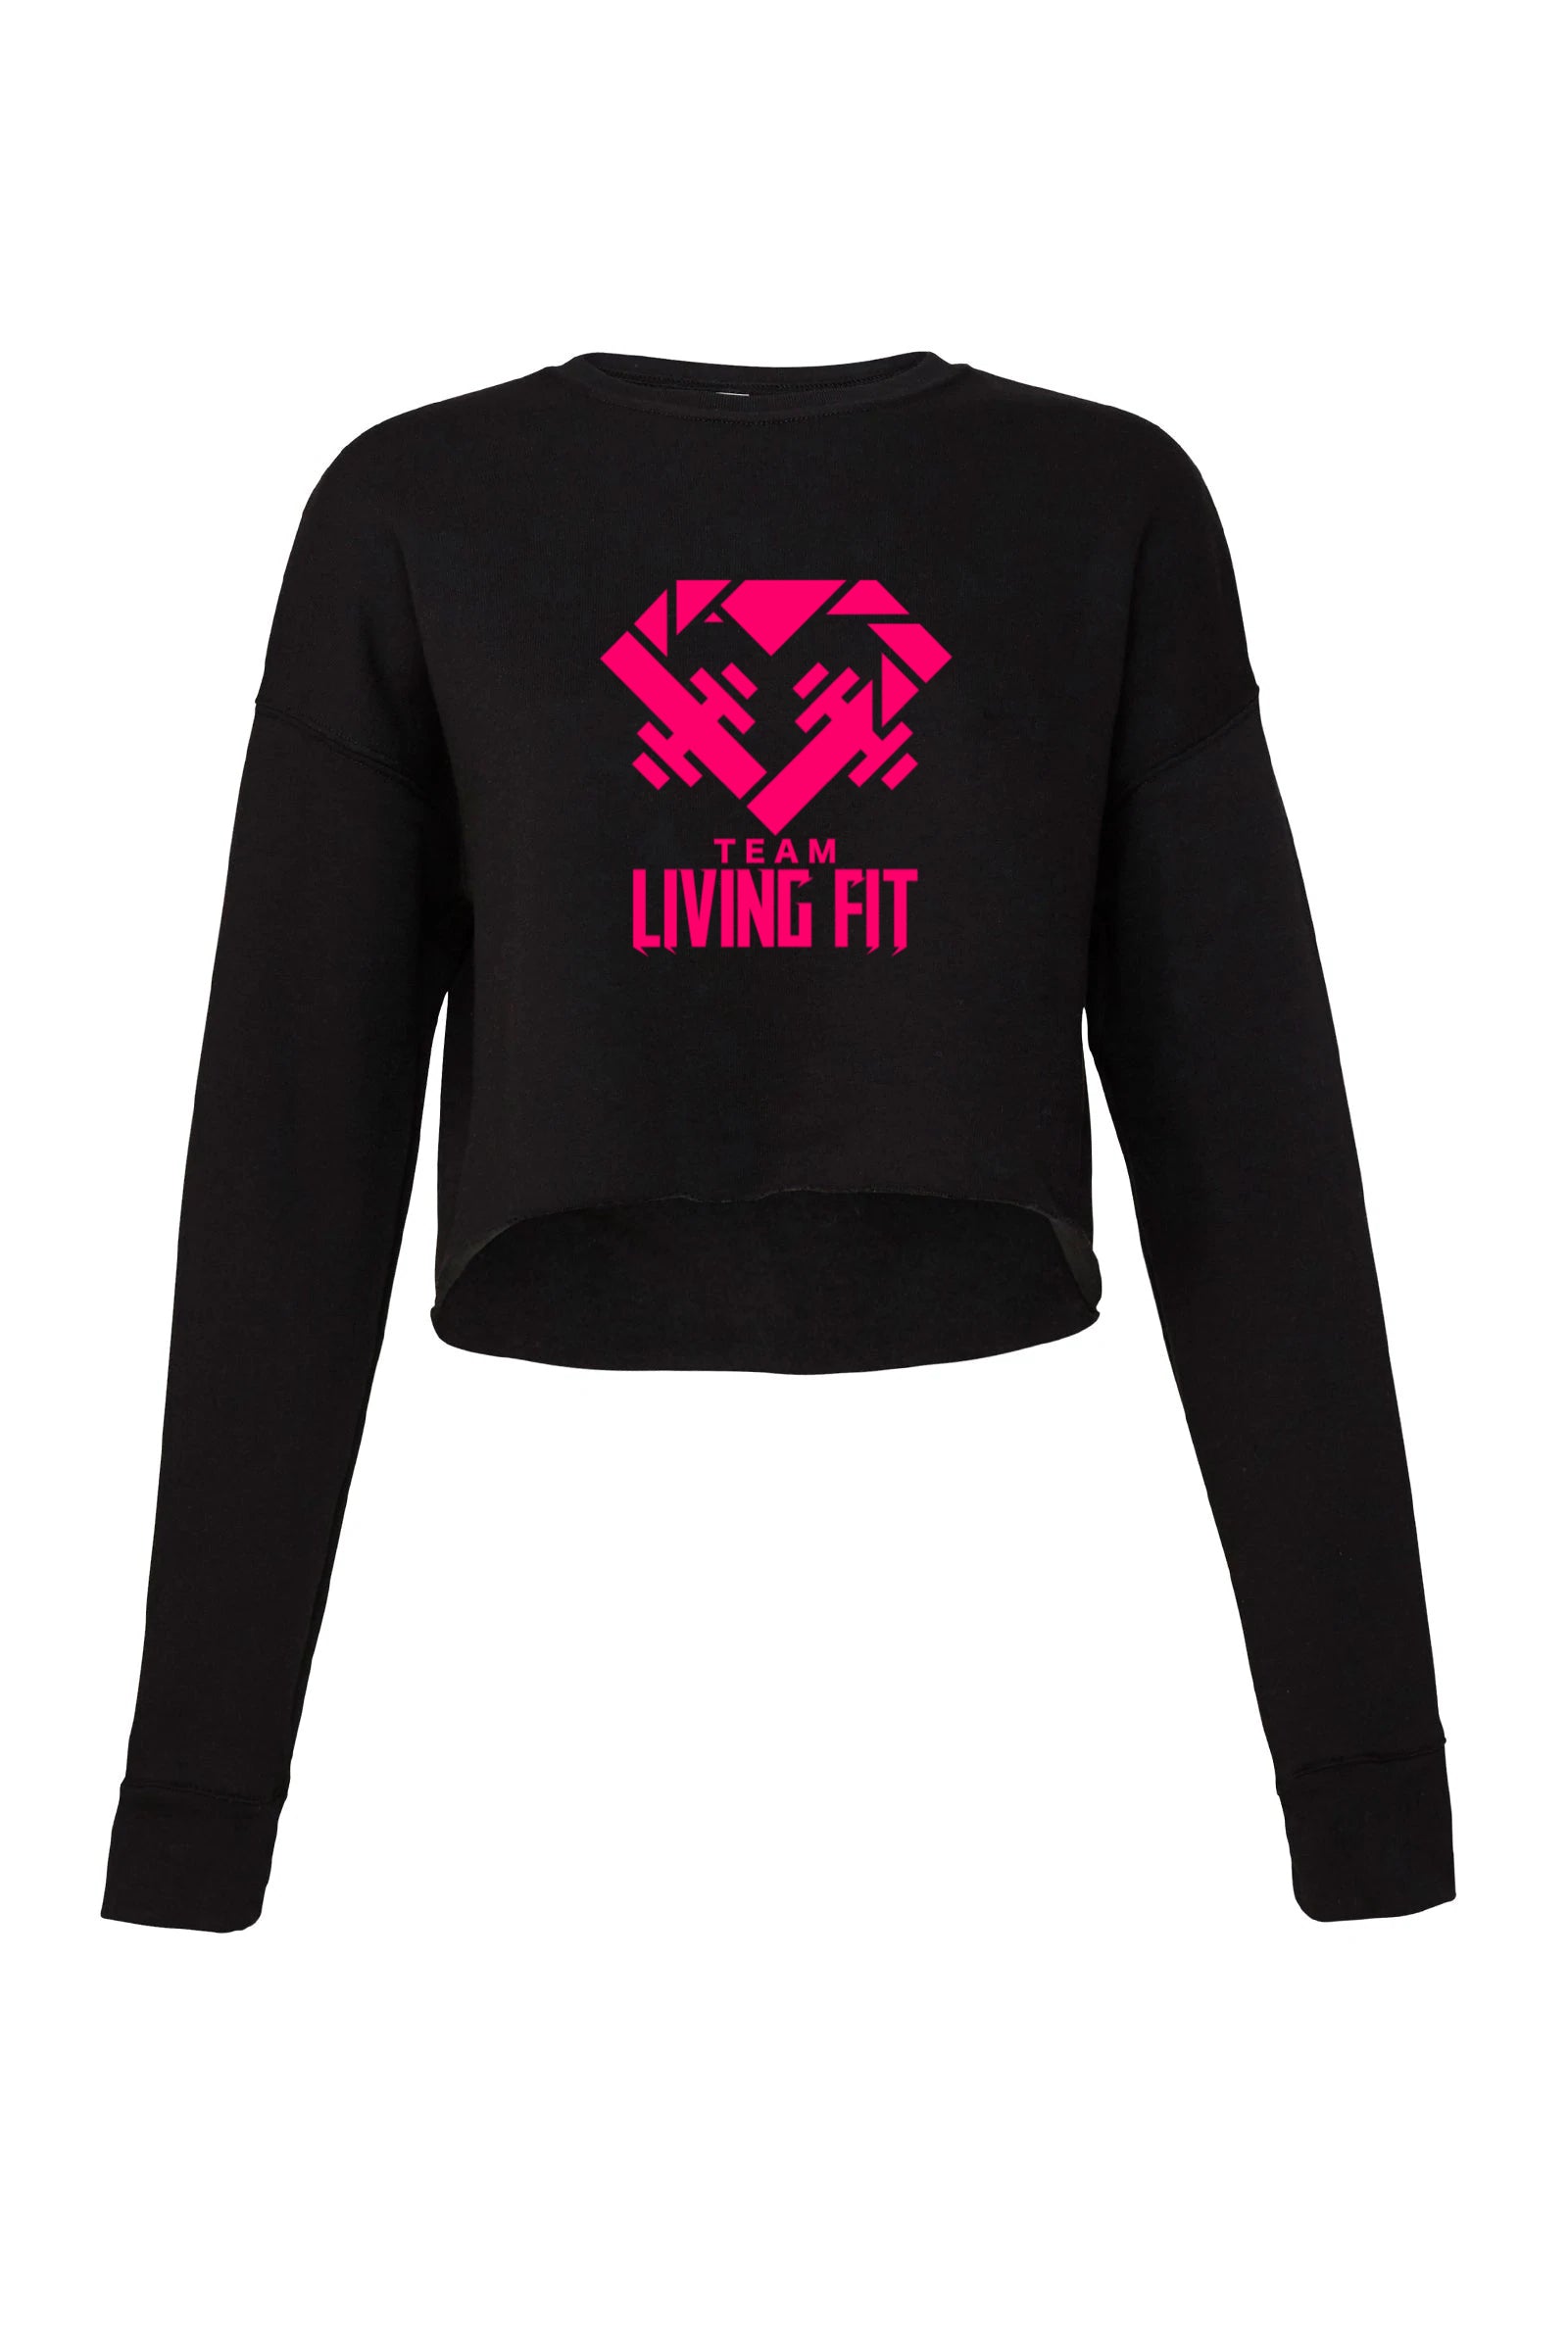 LIVING FIT COLLECTION - Fitsweatlife